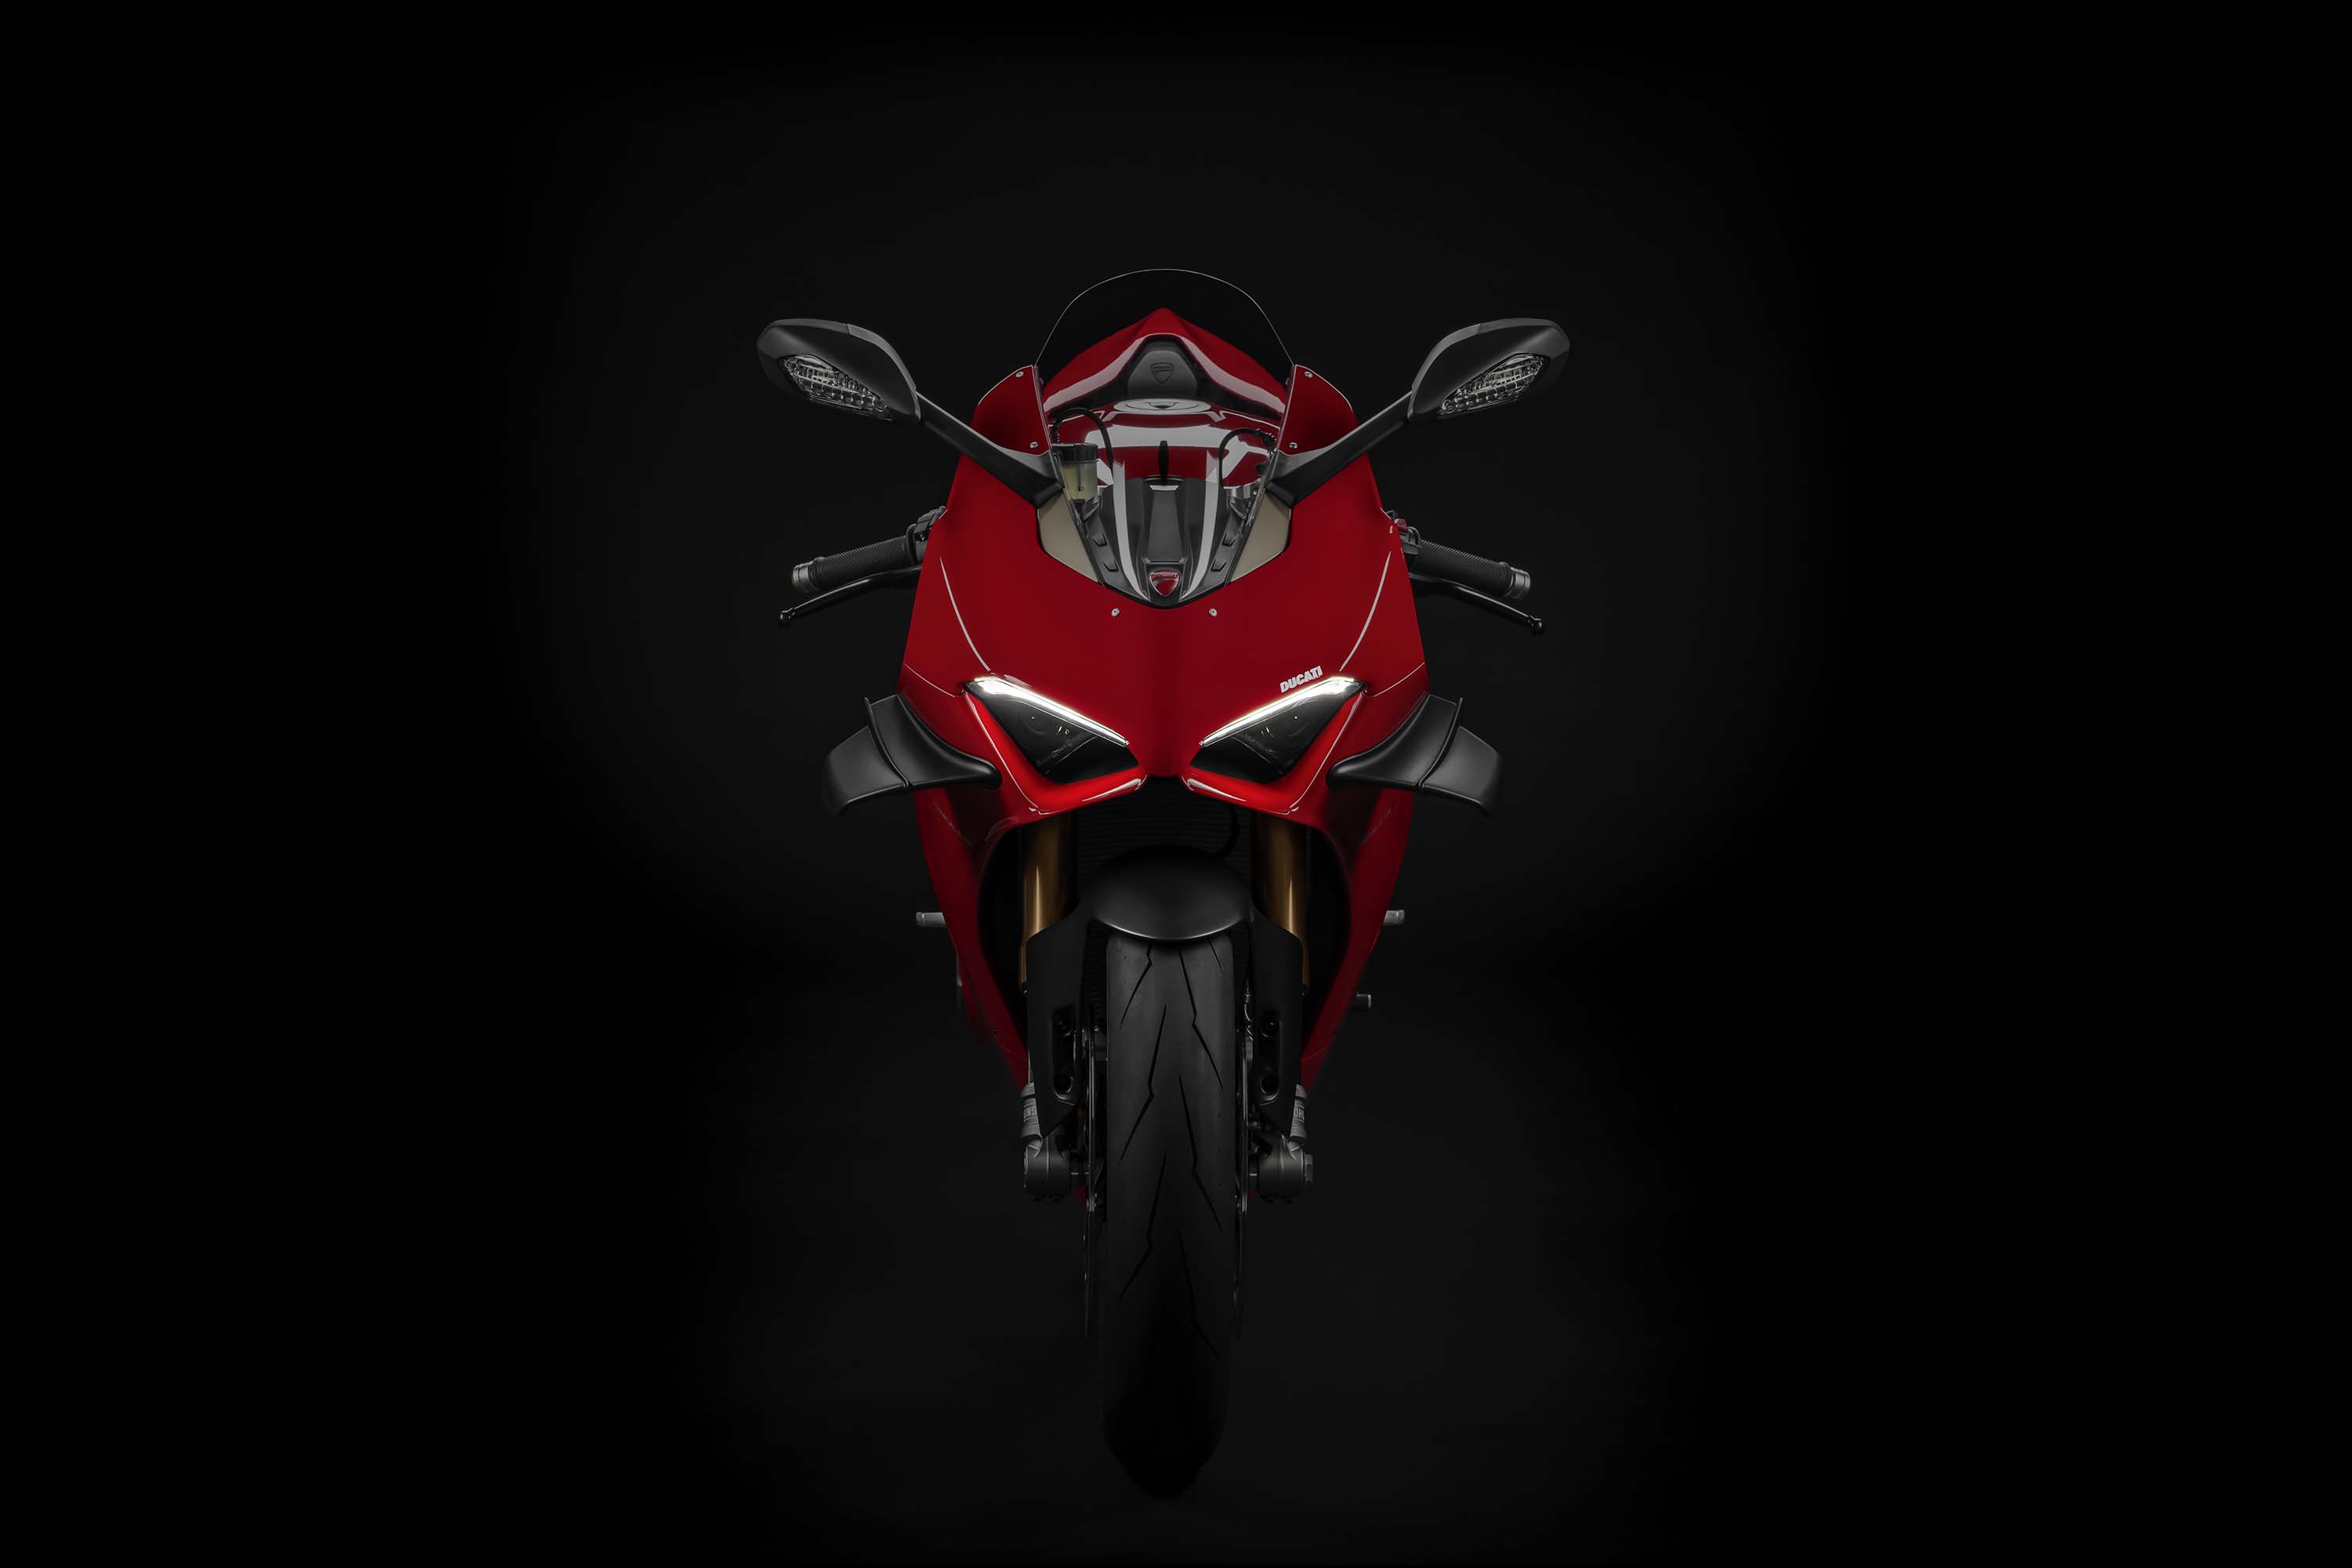 Red Ducati Panigale V4 S 2020 motorcycle on a black background Desktop  wallpapers 1366x768